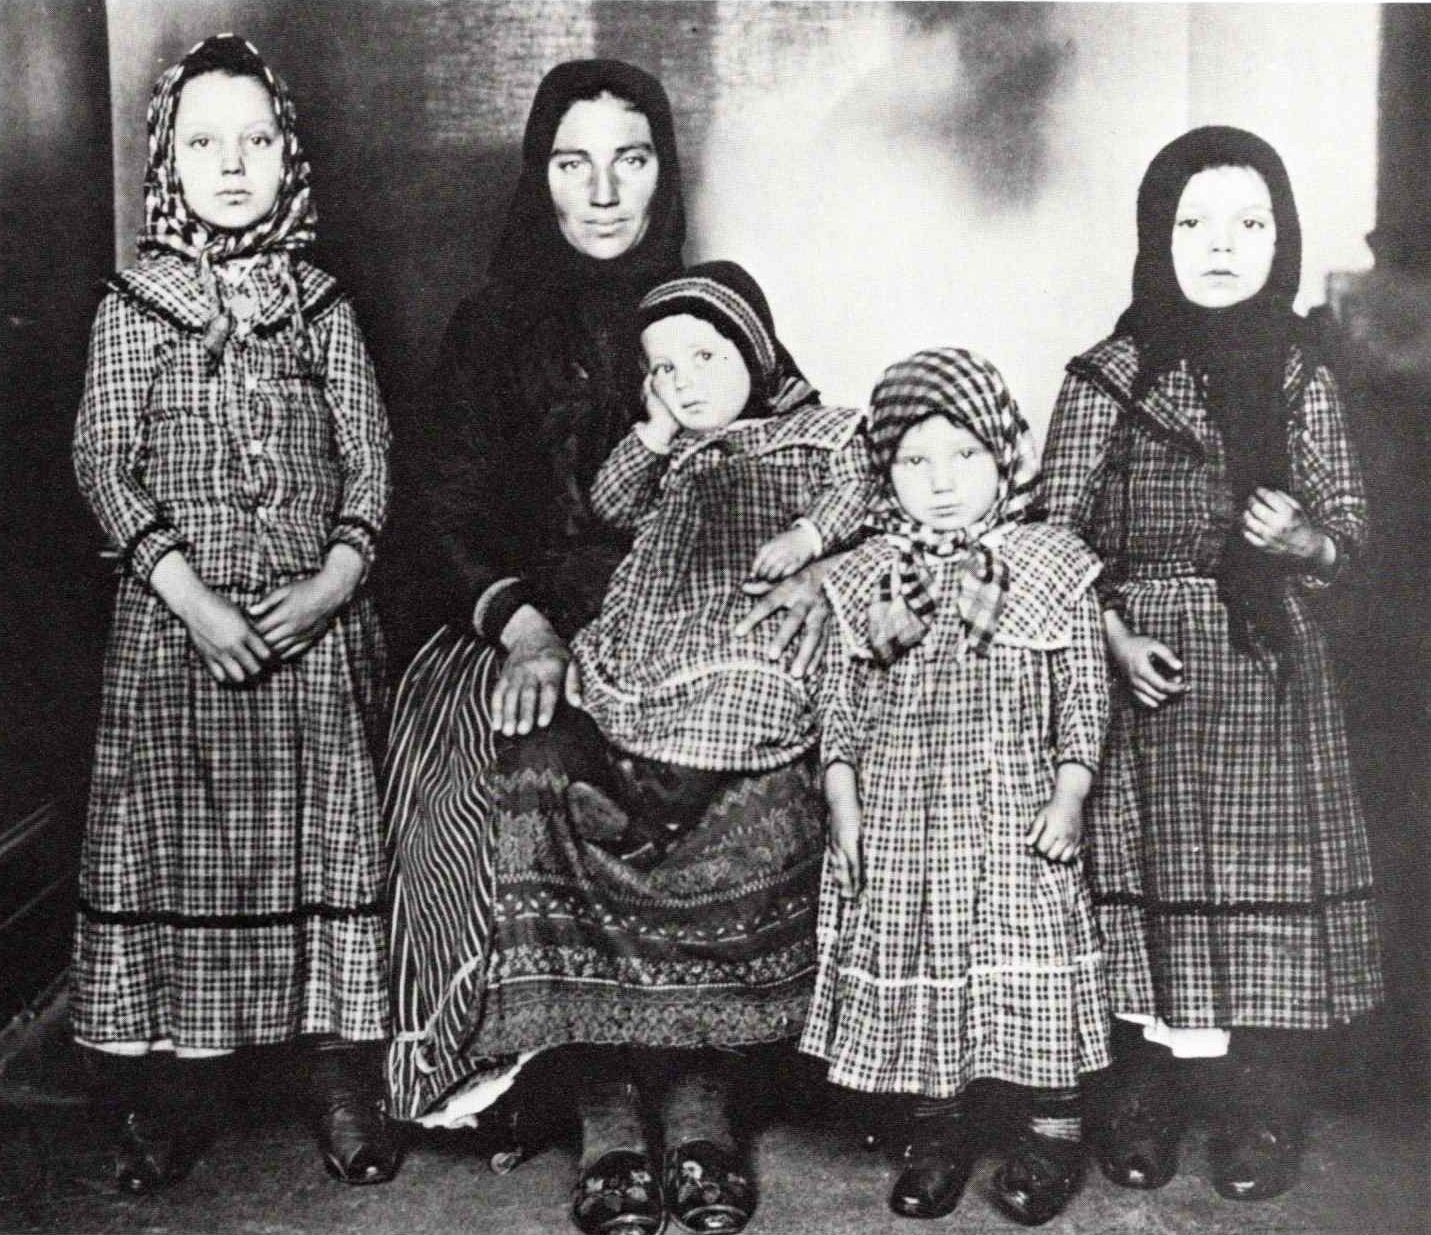 a black and white photo taken in 1910 of a family of hungarian immigrants, four children and their mother, arriving at Ellis Island